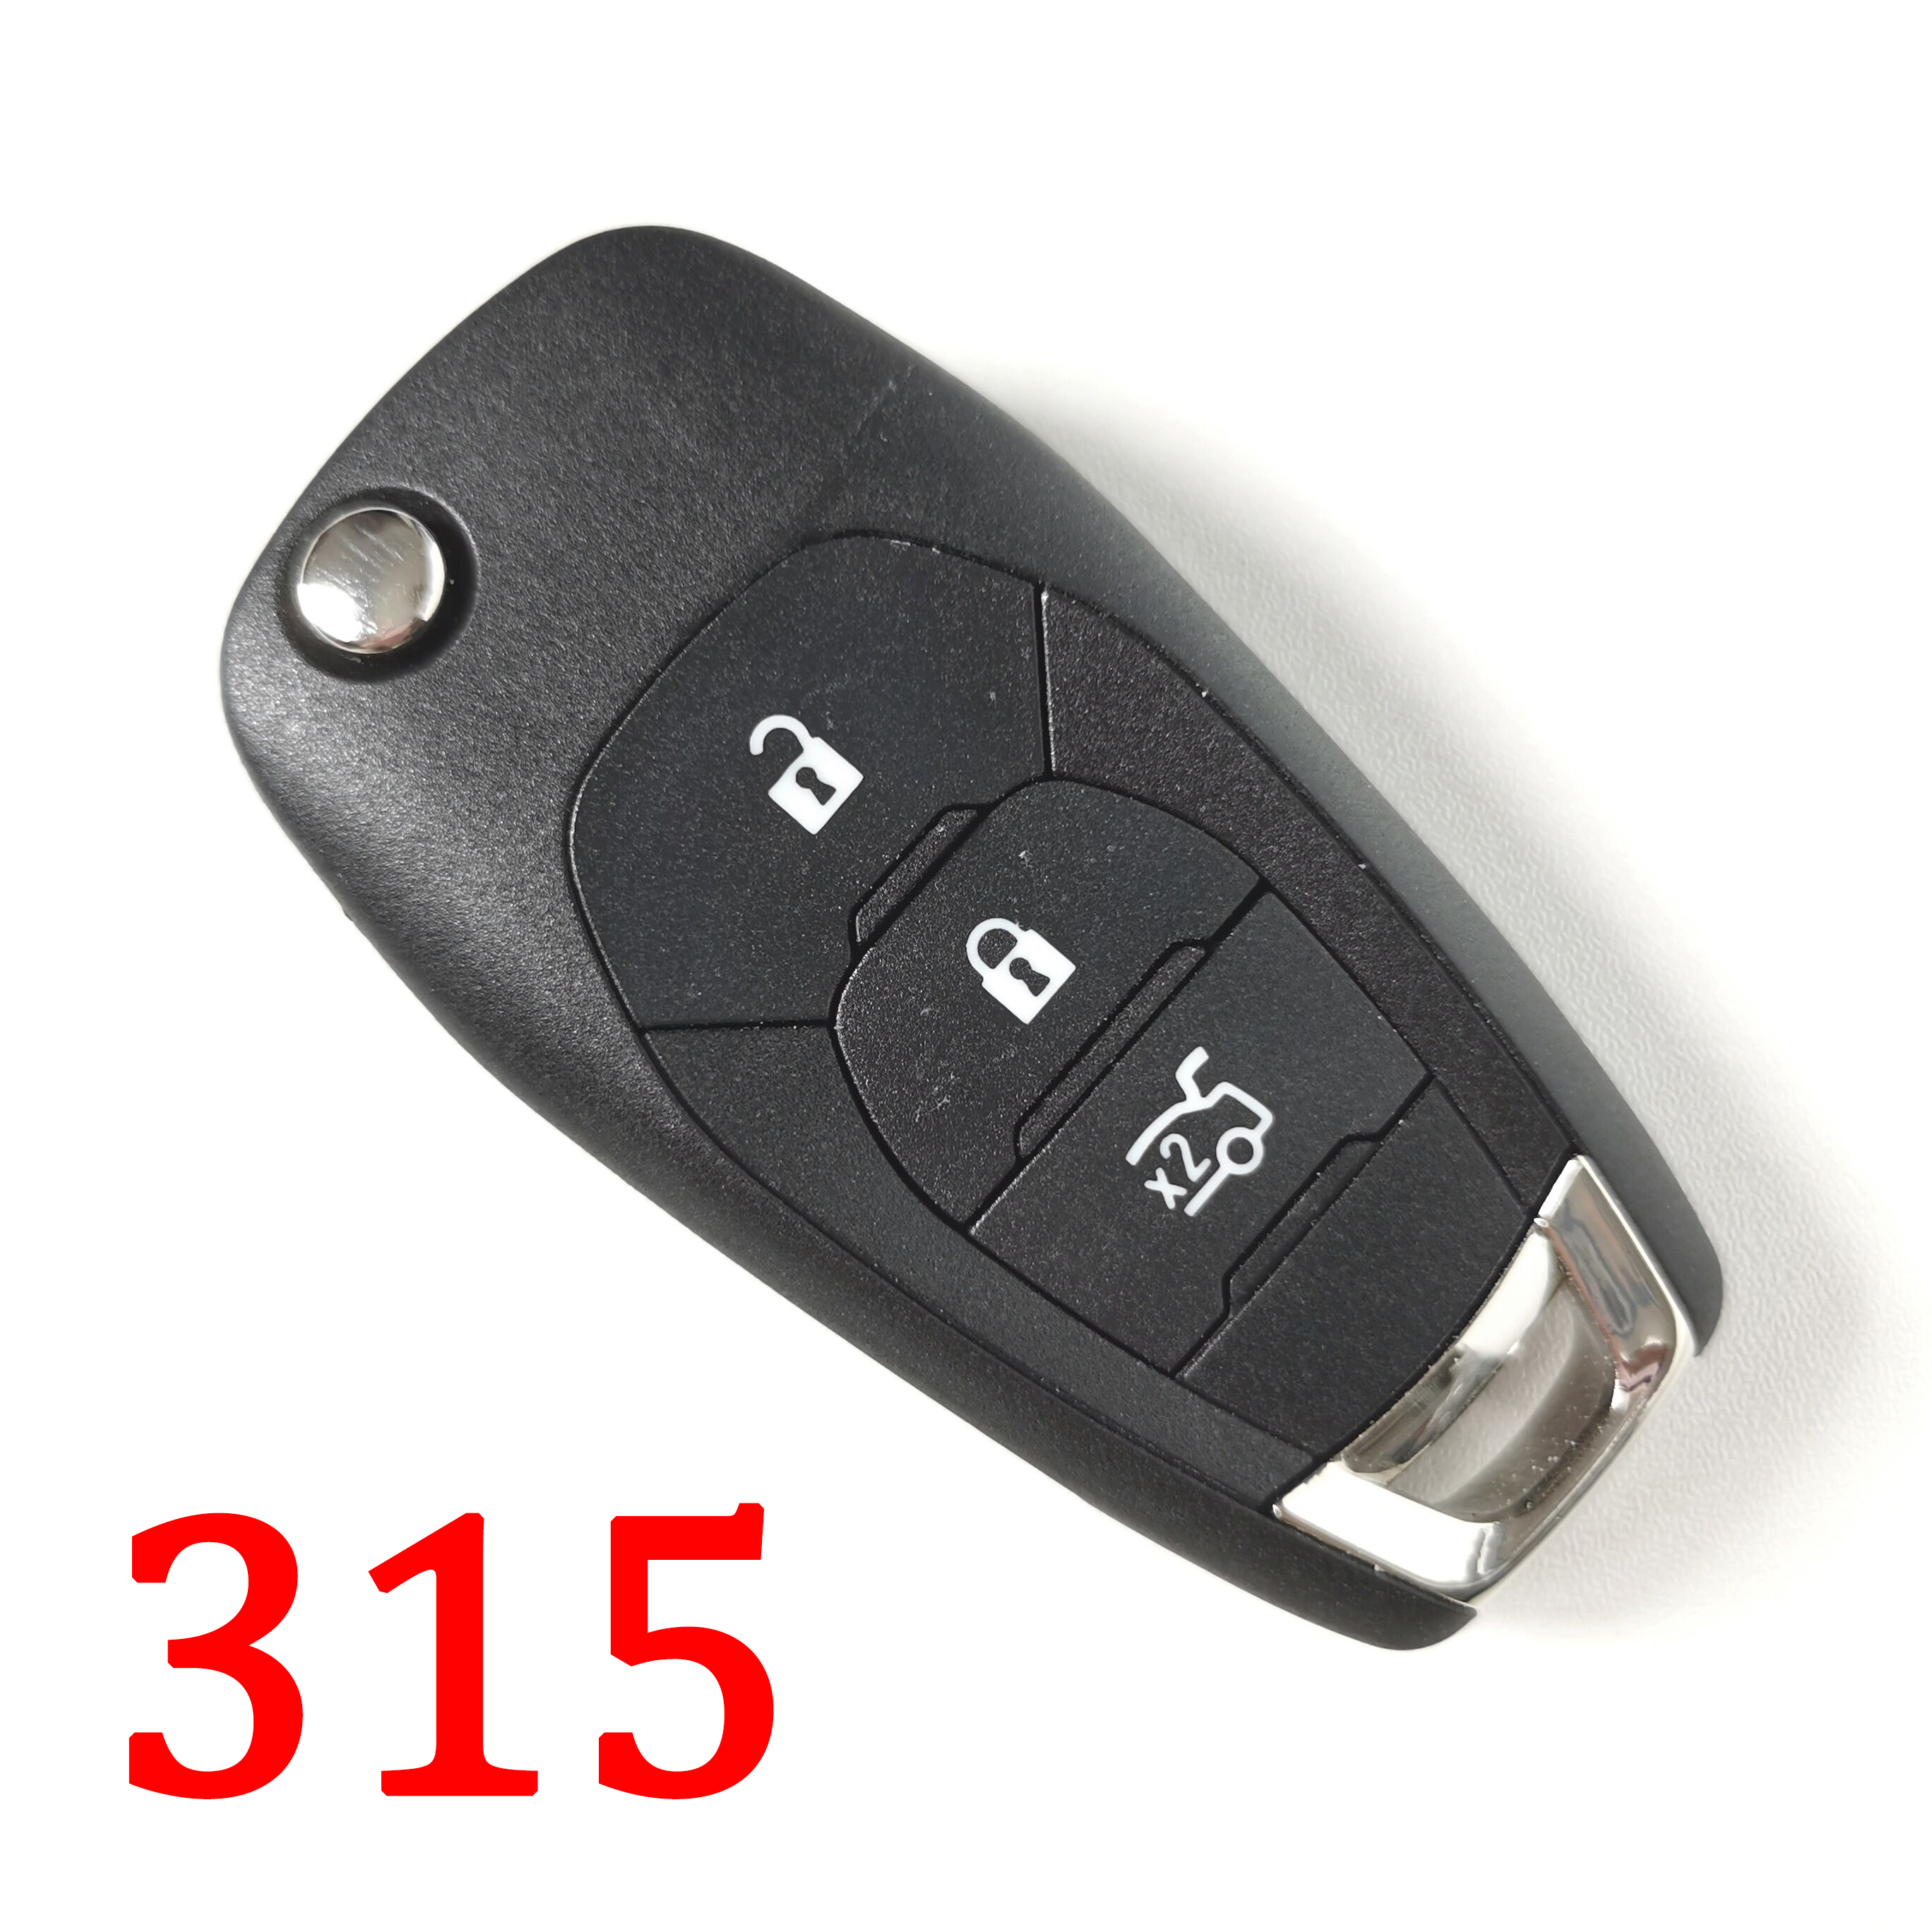 3 Buttons 315Mhz Flip Remote key for Chevrolet Cruz 2016 with 46 Chip 